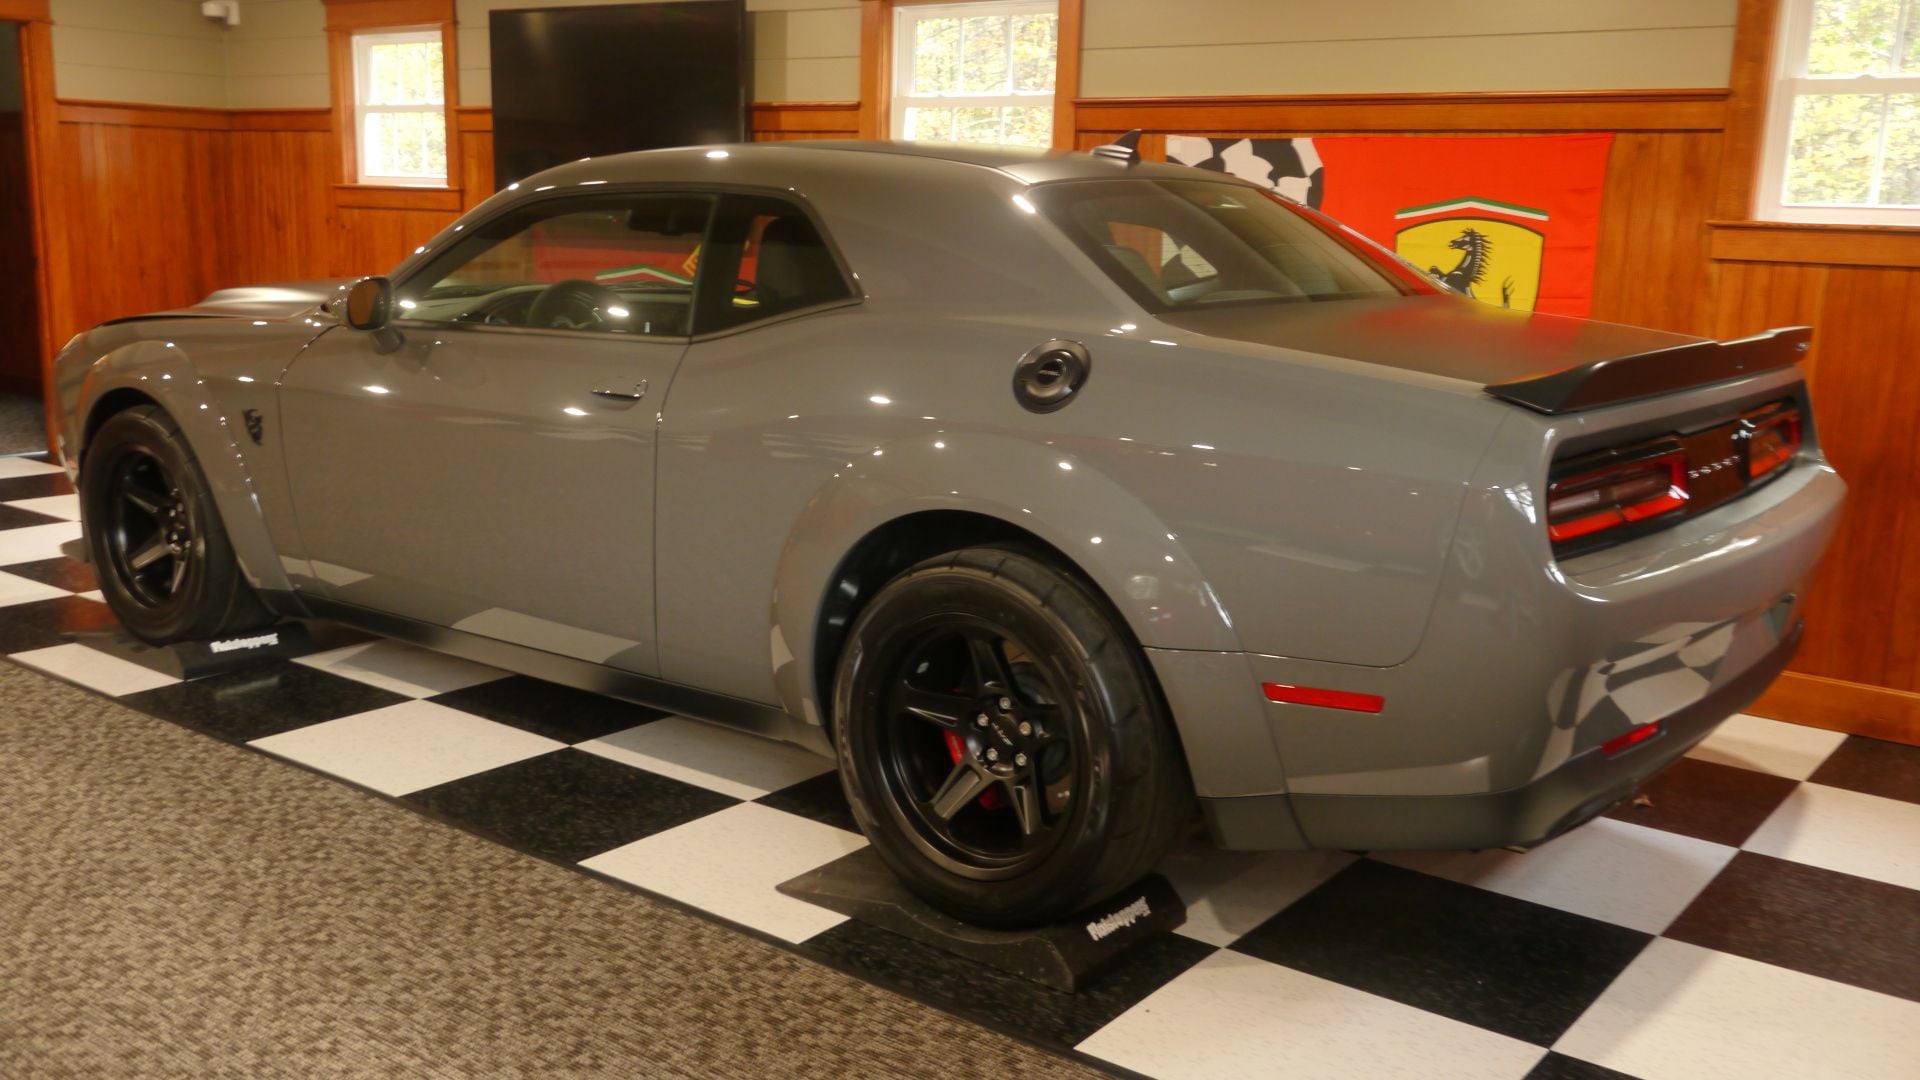 2018 Dodge Challenger - Dodge Demon for sale! - New - VIN 2C3CDZH97JH102003 - 18 Miles - 8 cyl - 2WD - Automatic - Coupe - Gray - Goffstown, NH 03045, United States